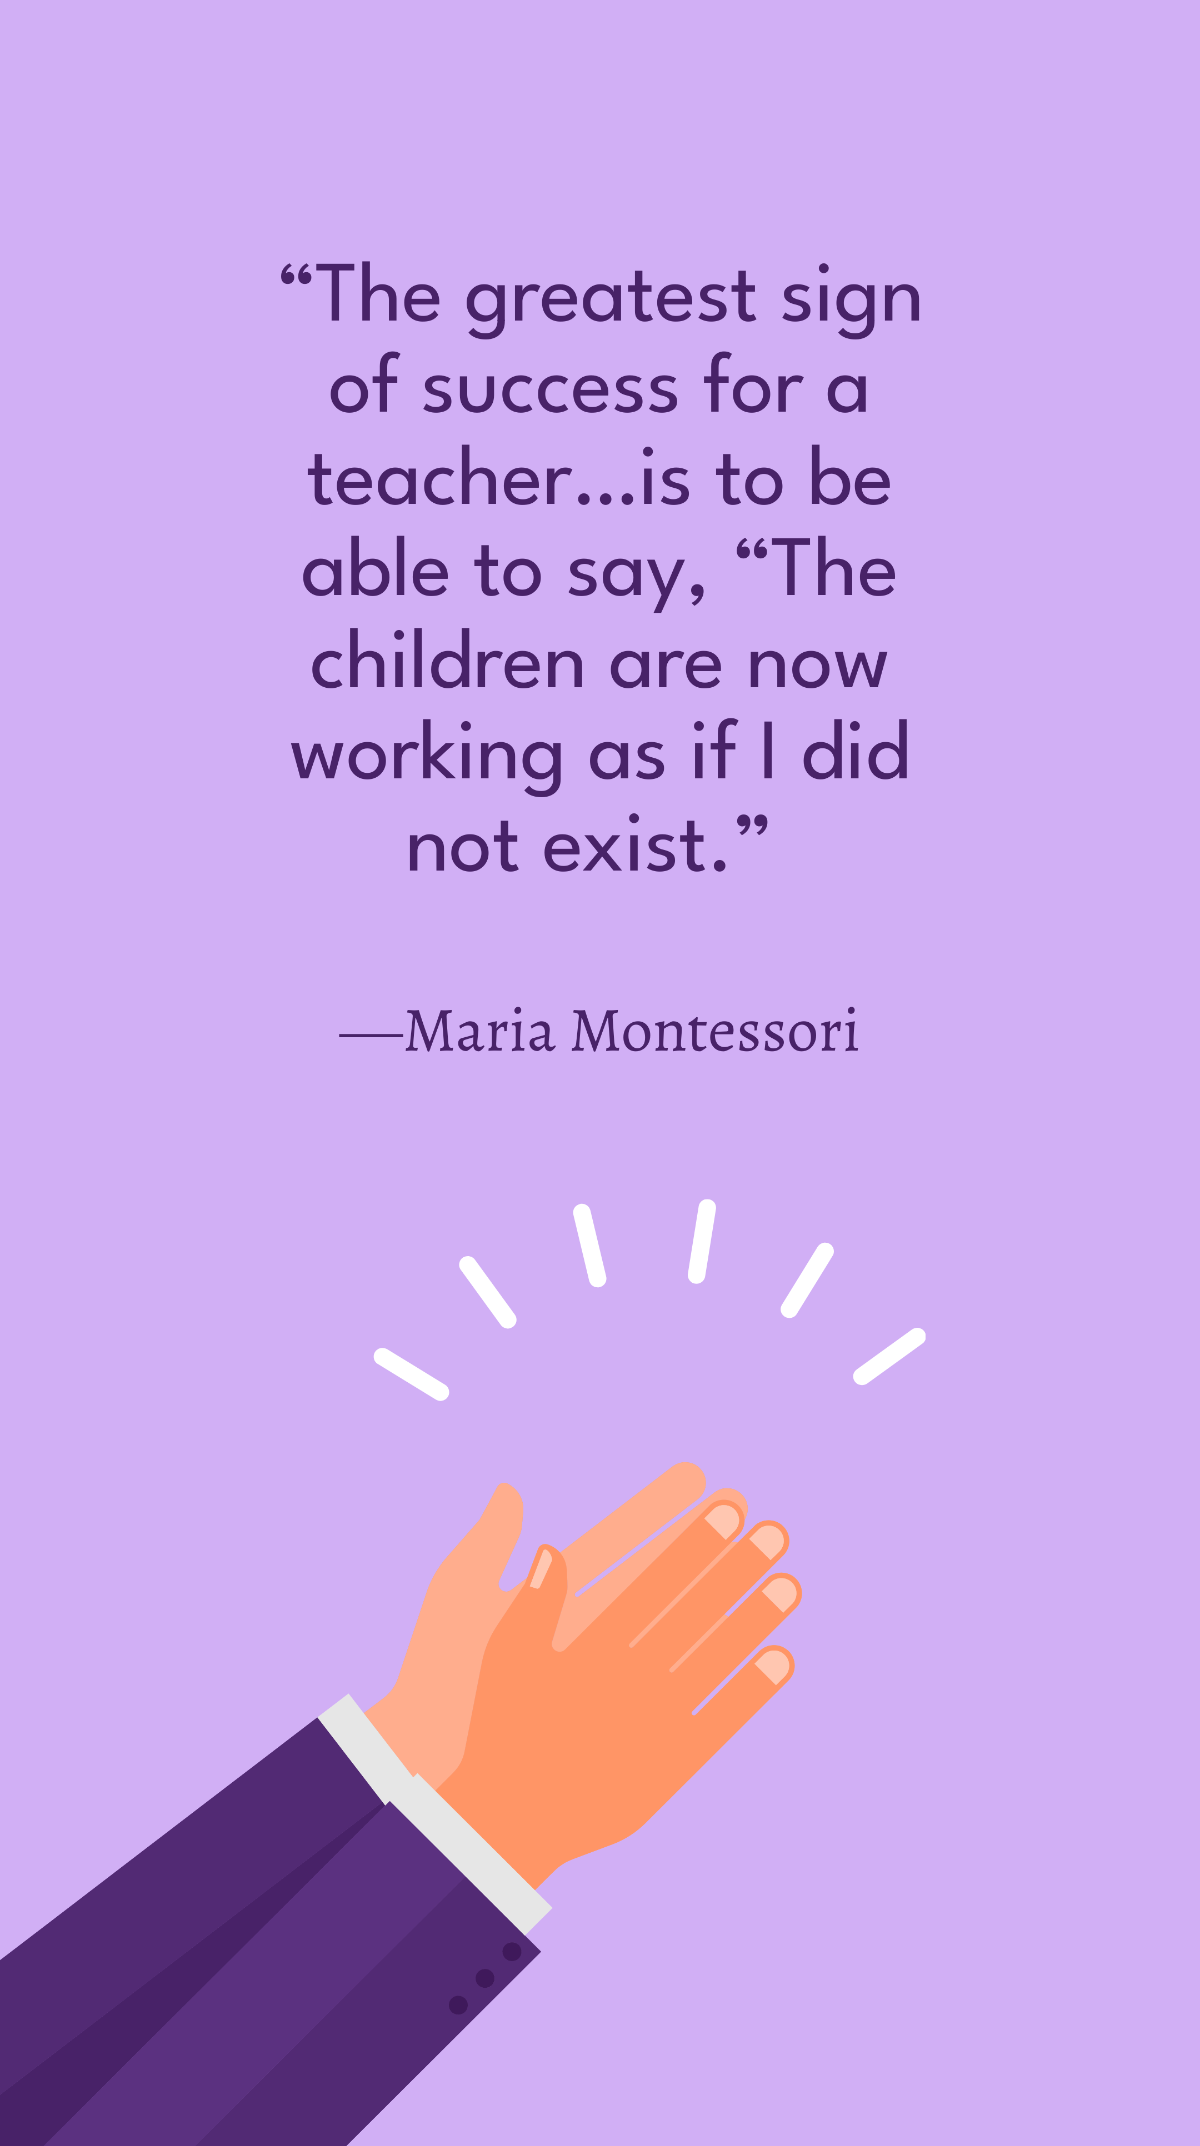 Maria Montessori - The greatest sign of success for a teacher…is to be able to say, “The children are now working as if I did not exist.